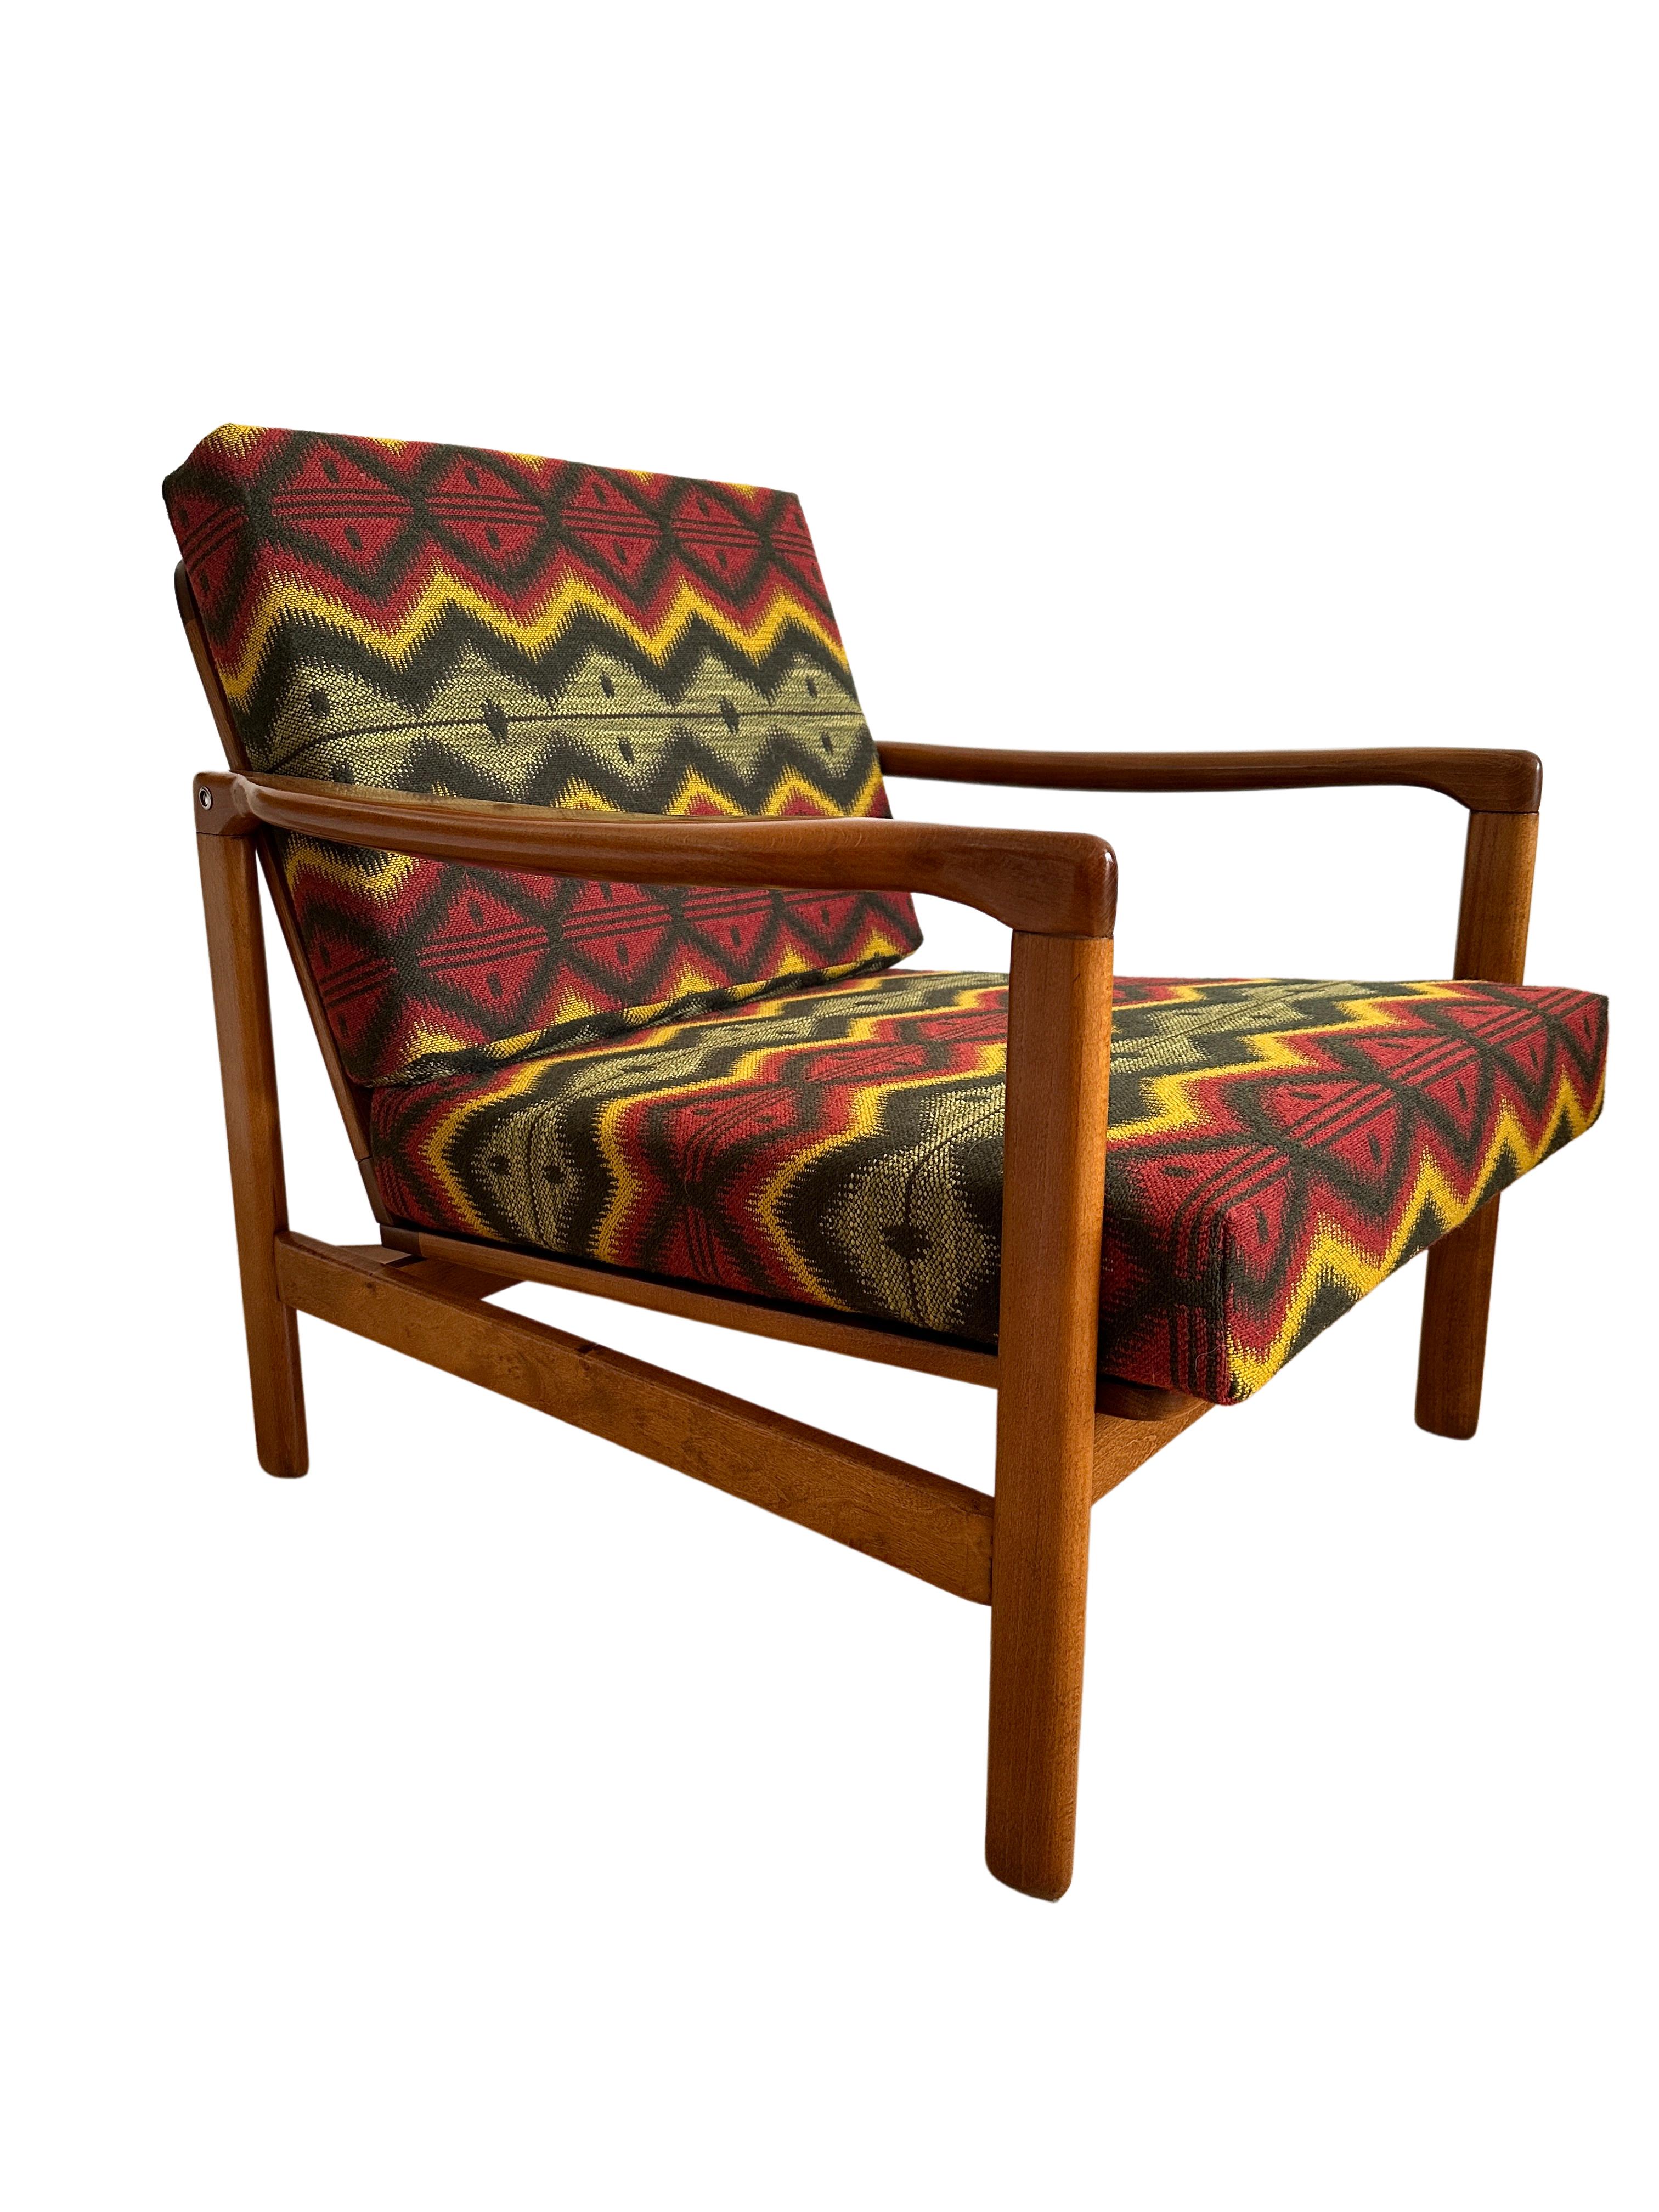 Midcentury Armchair by Zenon Bączyk, Mind the Gap Upholstery, Europe, 1960s For Sale 5